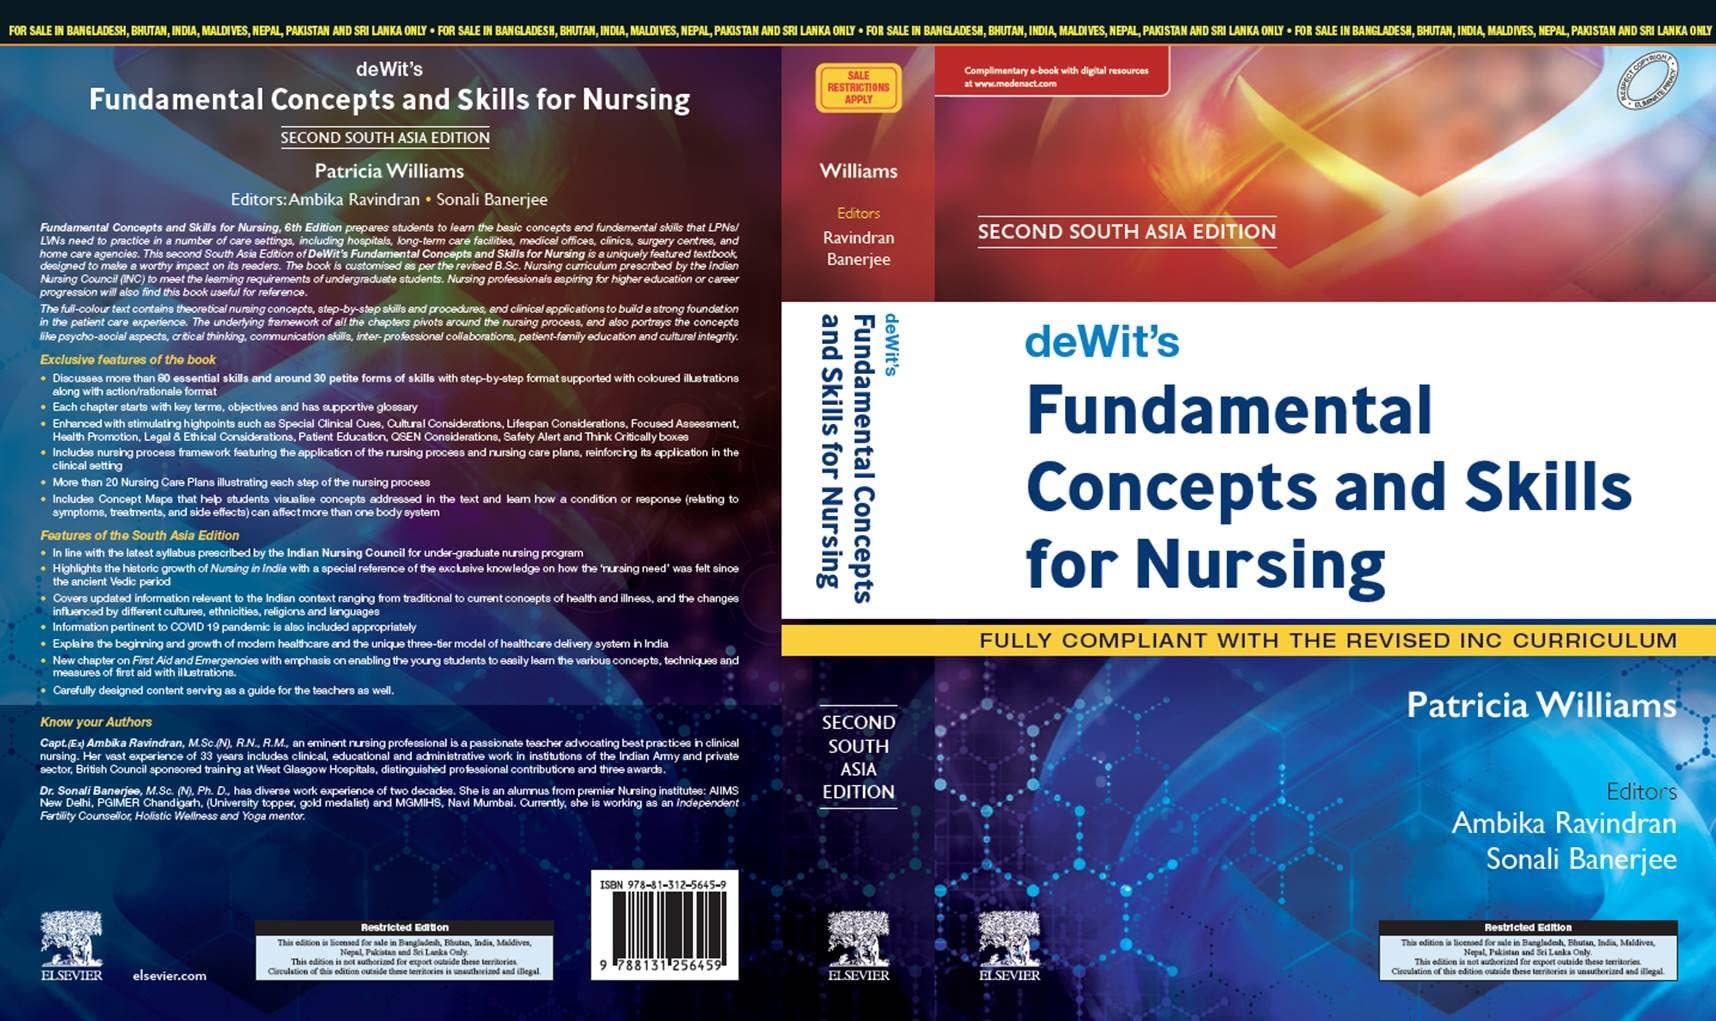 DeWit's Fundamental Concepts and Skills for Nursing, 2nd South Asia Edition